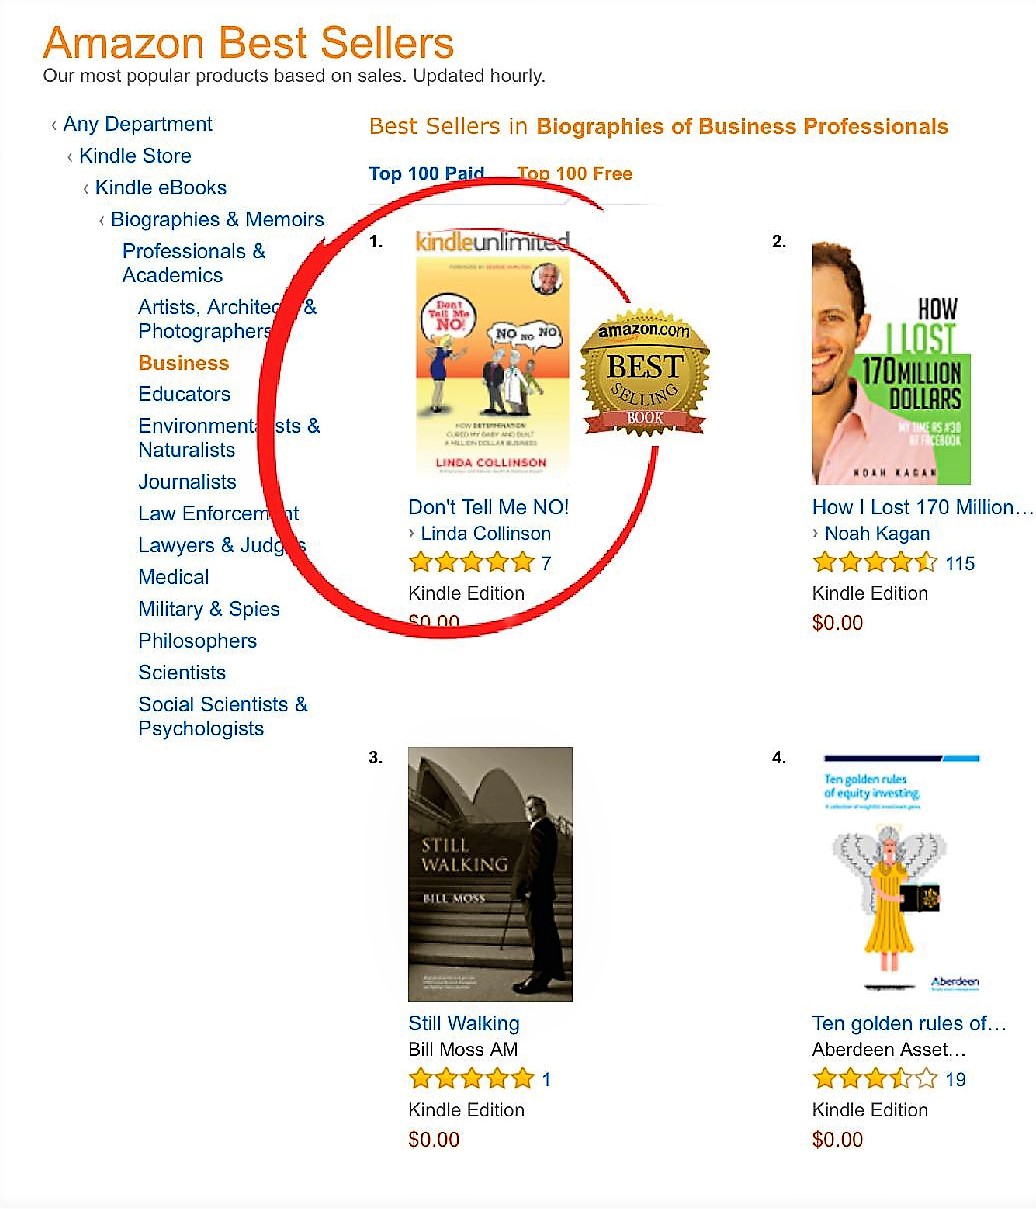 Insider Media Client Becomes Amazon Best Seller